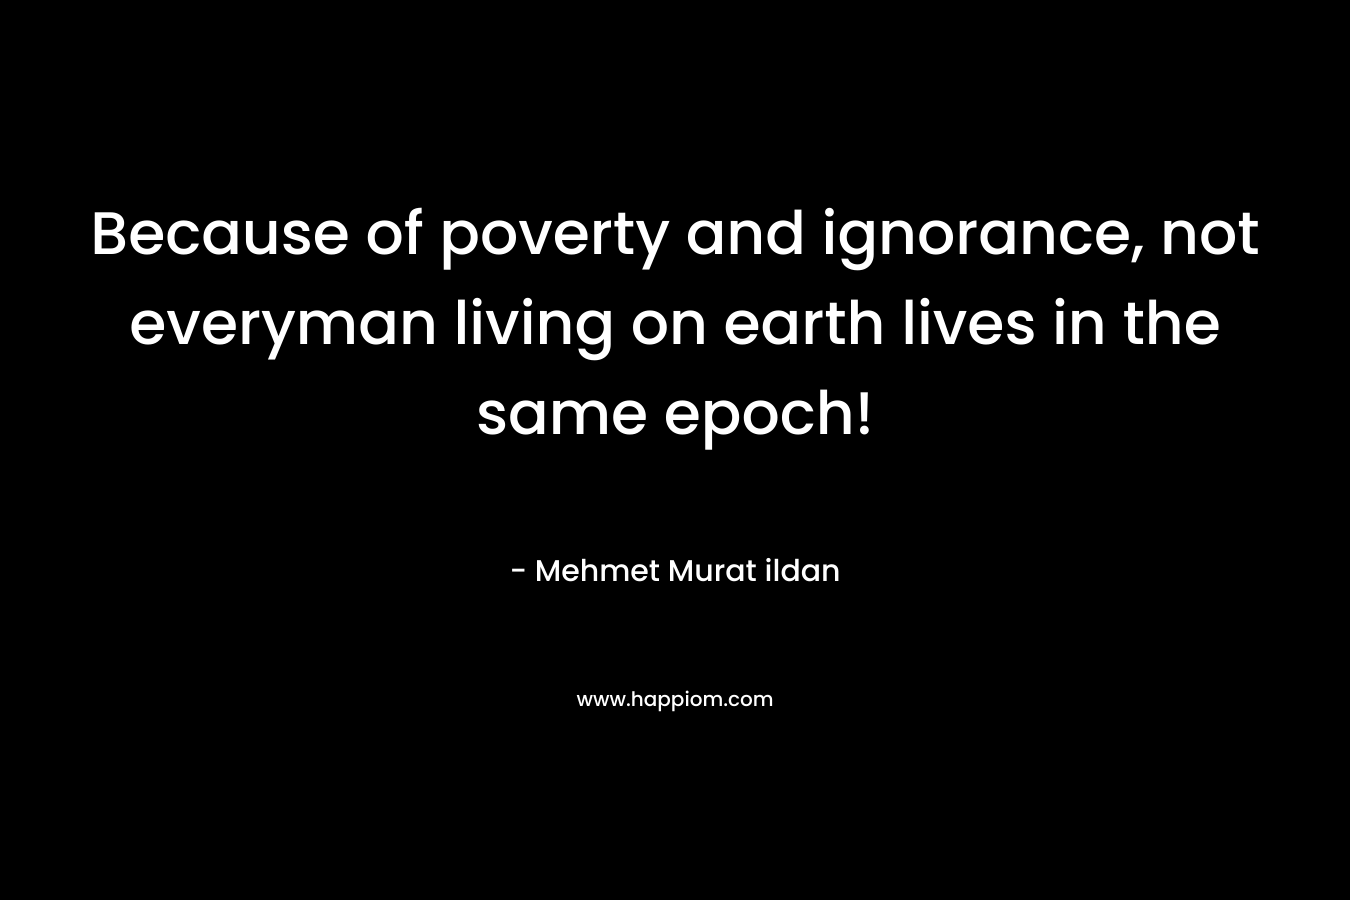 Because of poverty and ignorance, not everyman living on earth lives in the same epoch!